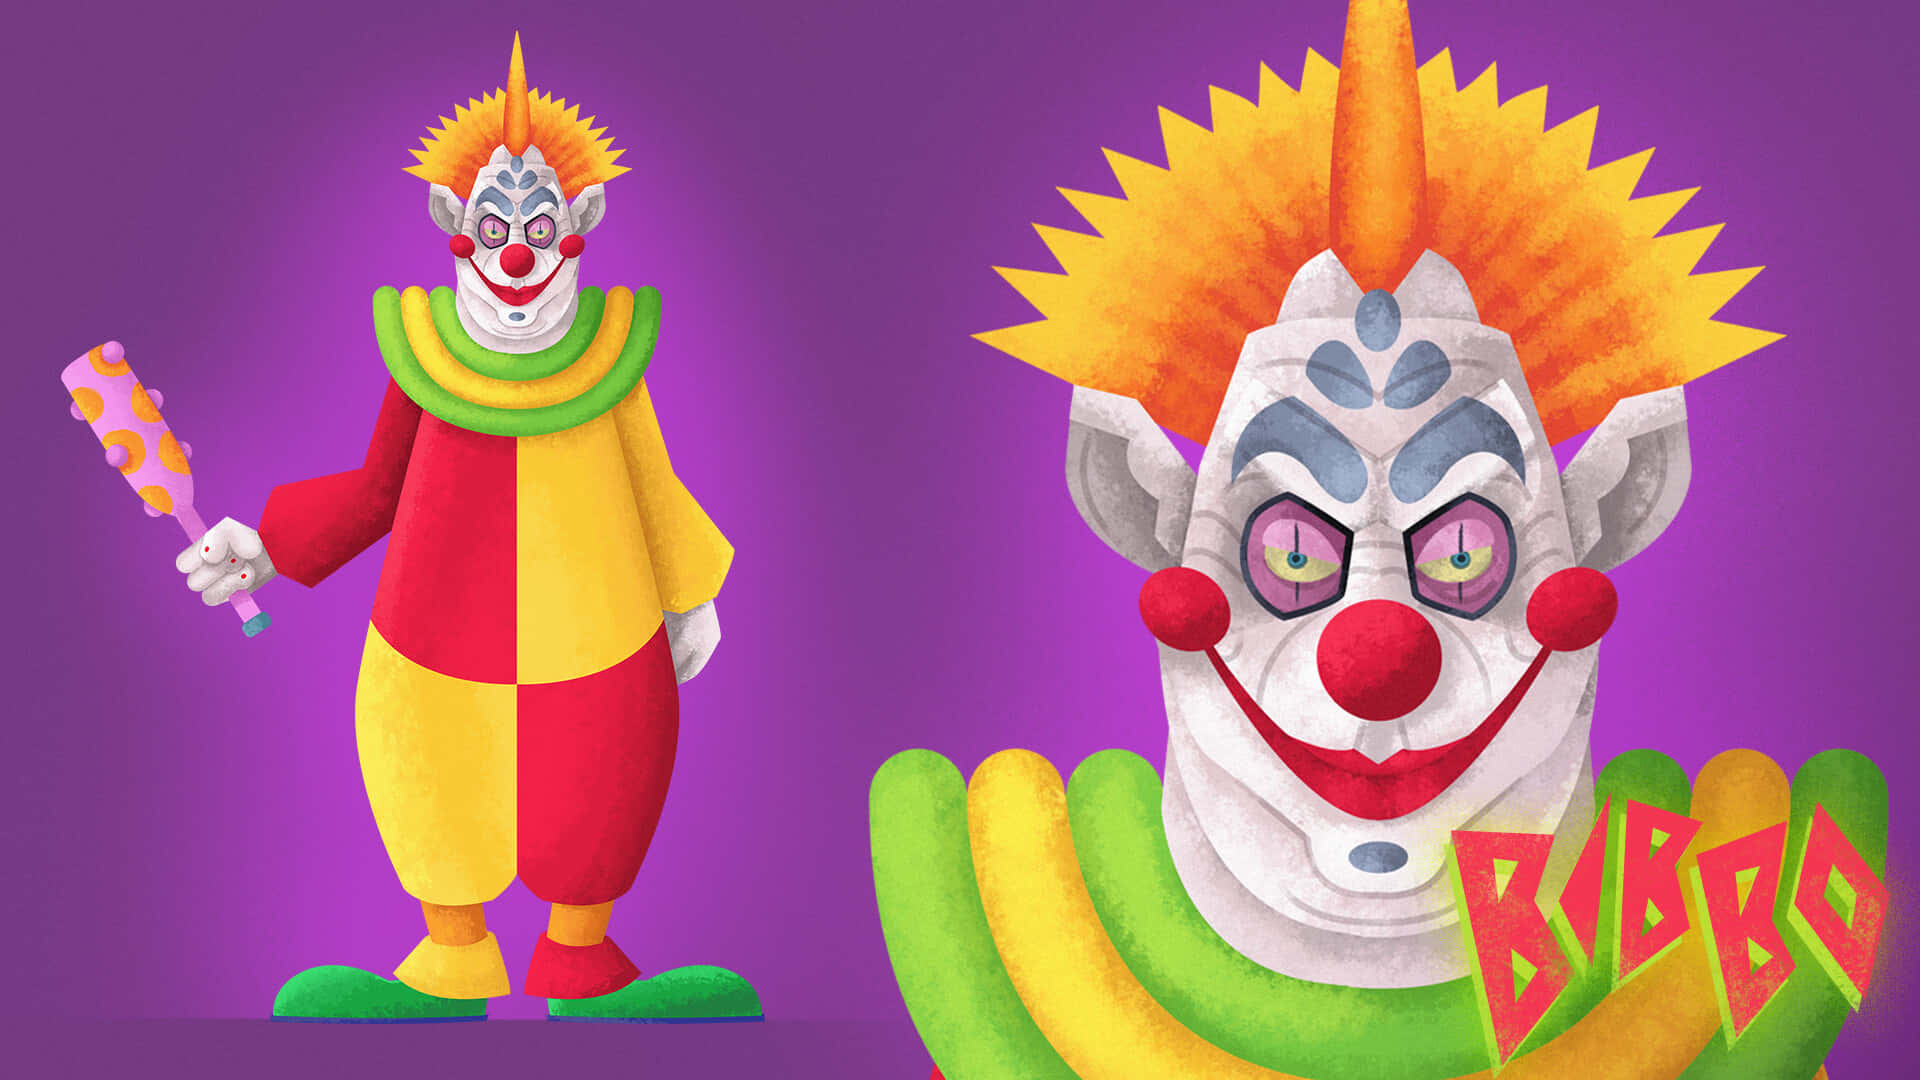 Killer Klowns From Outer Space With A Purple Club Wallpaper